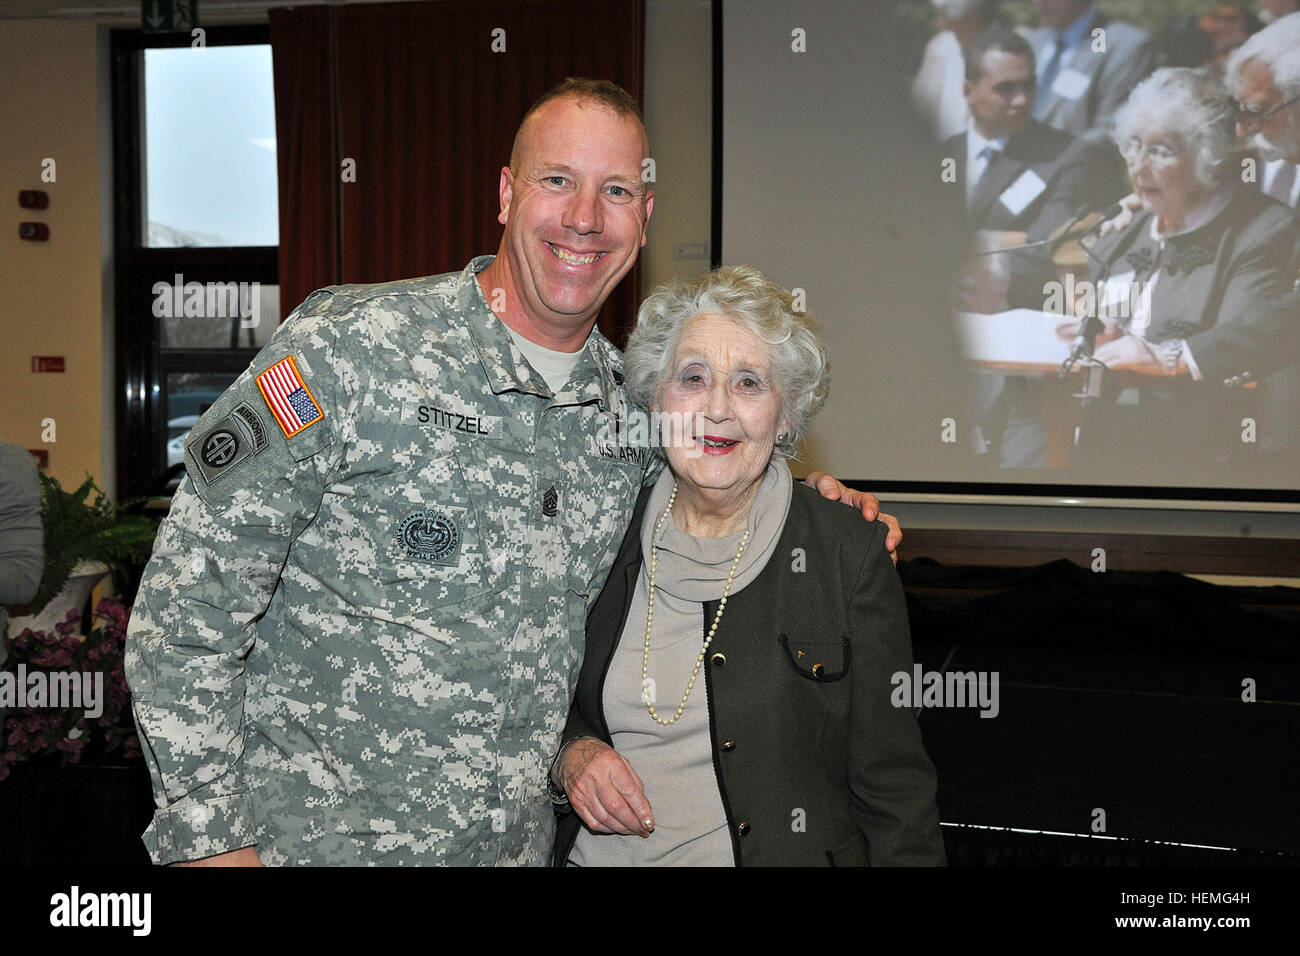 Command Sgt. Majr. Jeffery Stitzel, USARAF Command Sergeant Major,  thanks Noreen Riols, WWII British spy for her contribution to Women's History Month on March 28, 2013 in Caserma Ederle, Vicenza, Italy. (U.S. Army photo by Paolo Bovo JM436 7 JMTC Vicenza - Italy/Released Noreen Riols, World War II British spy 130328-A-JM436-042 Stock Photo